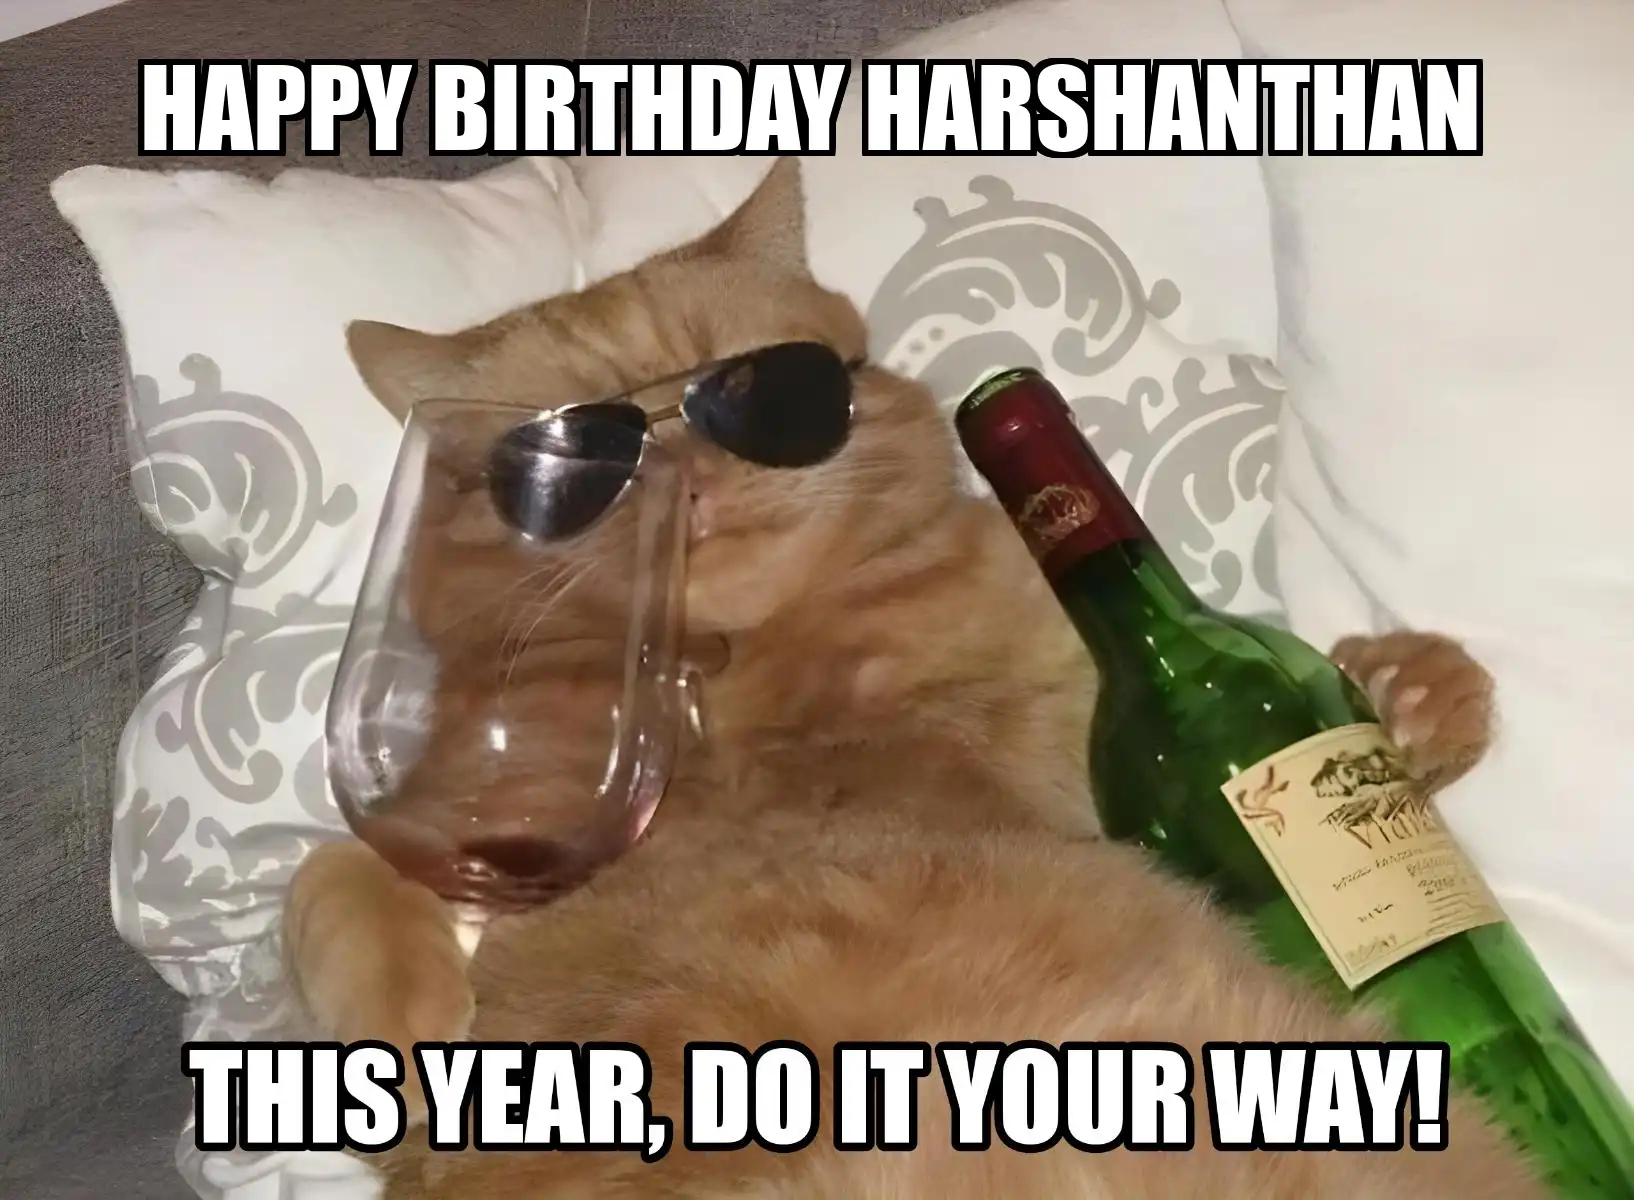 Happy Birthday Harshanthan This Year Do It Your Way Meme